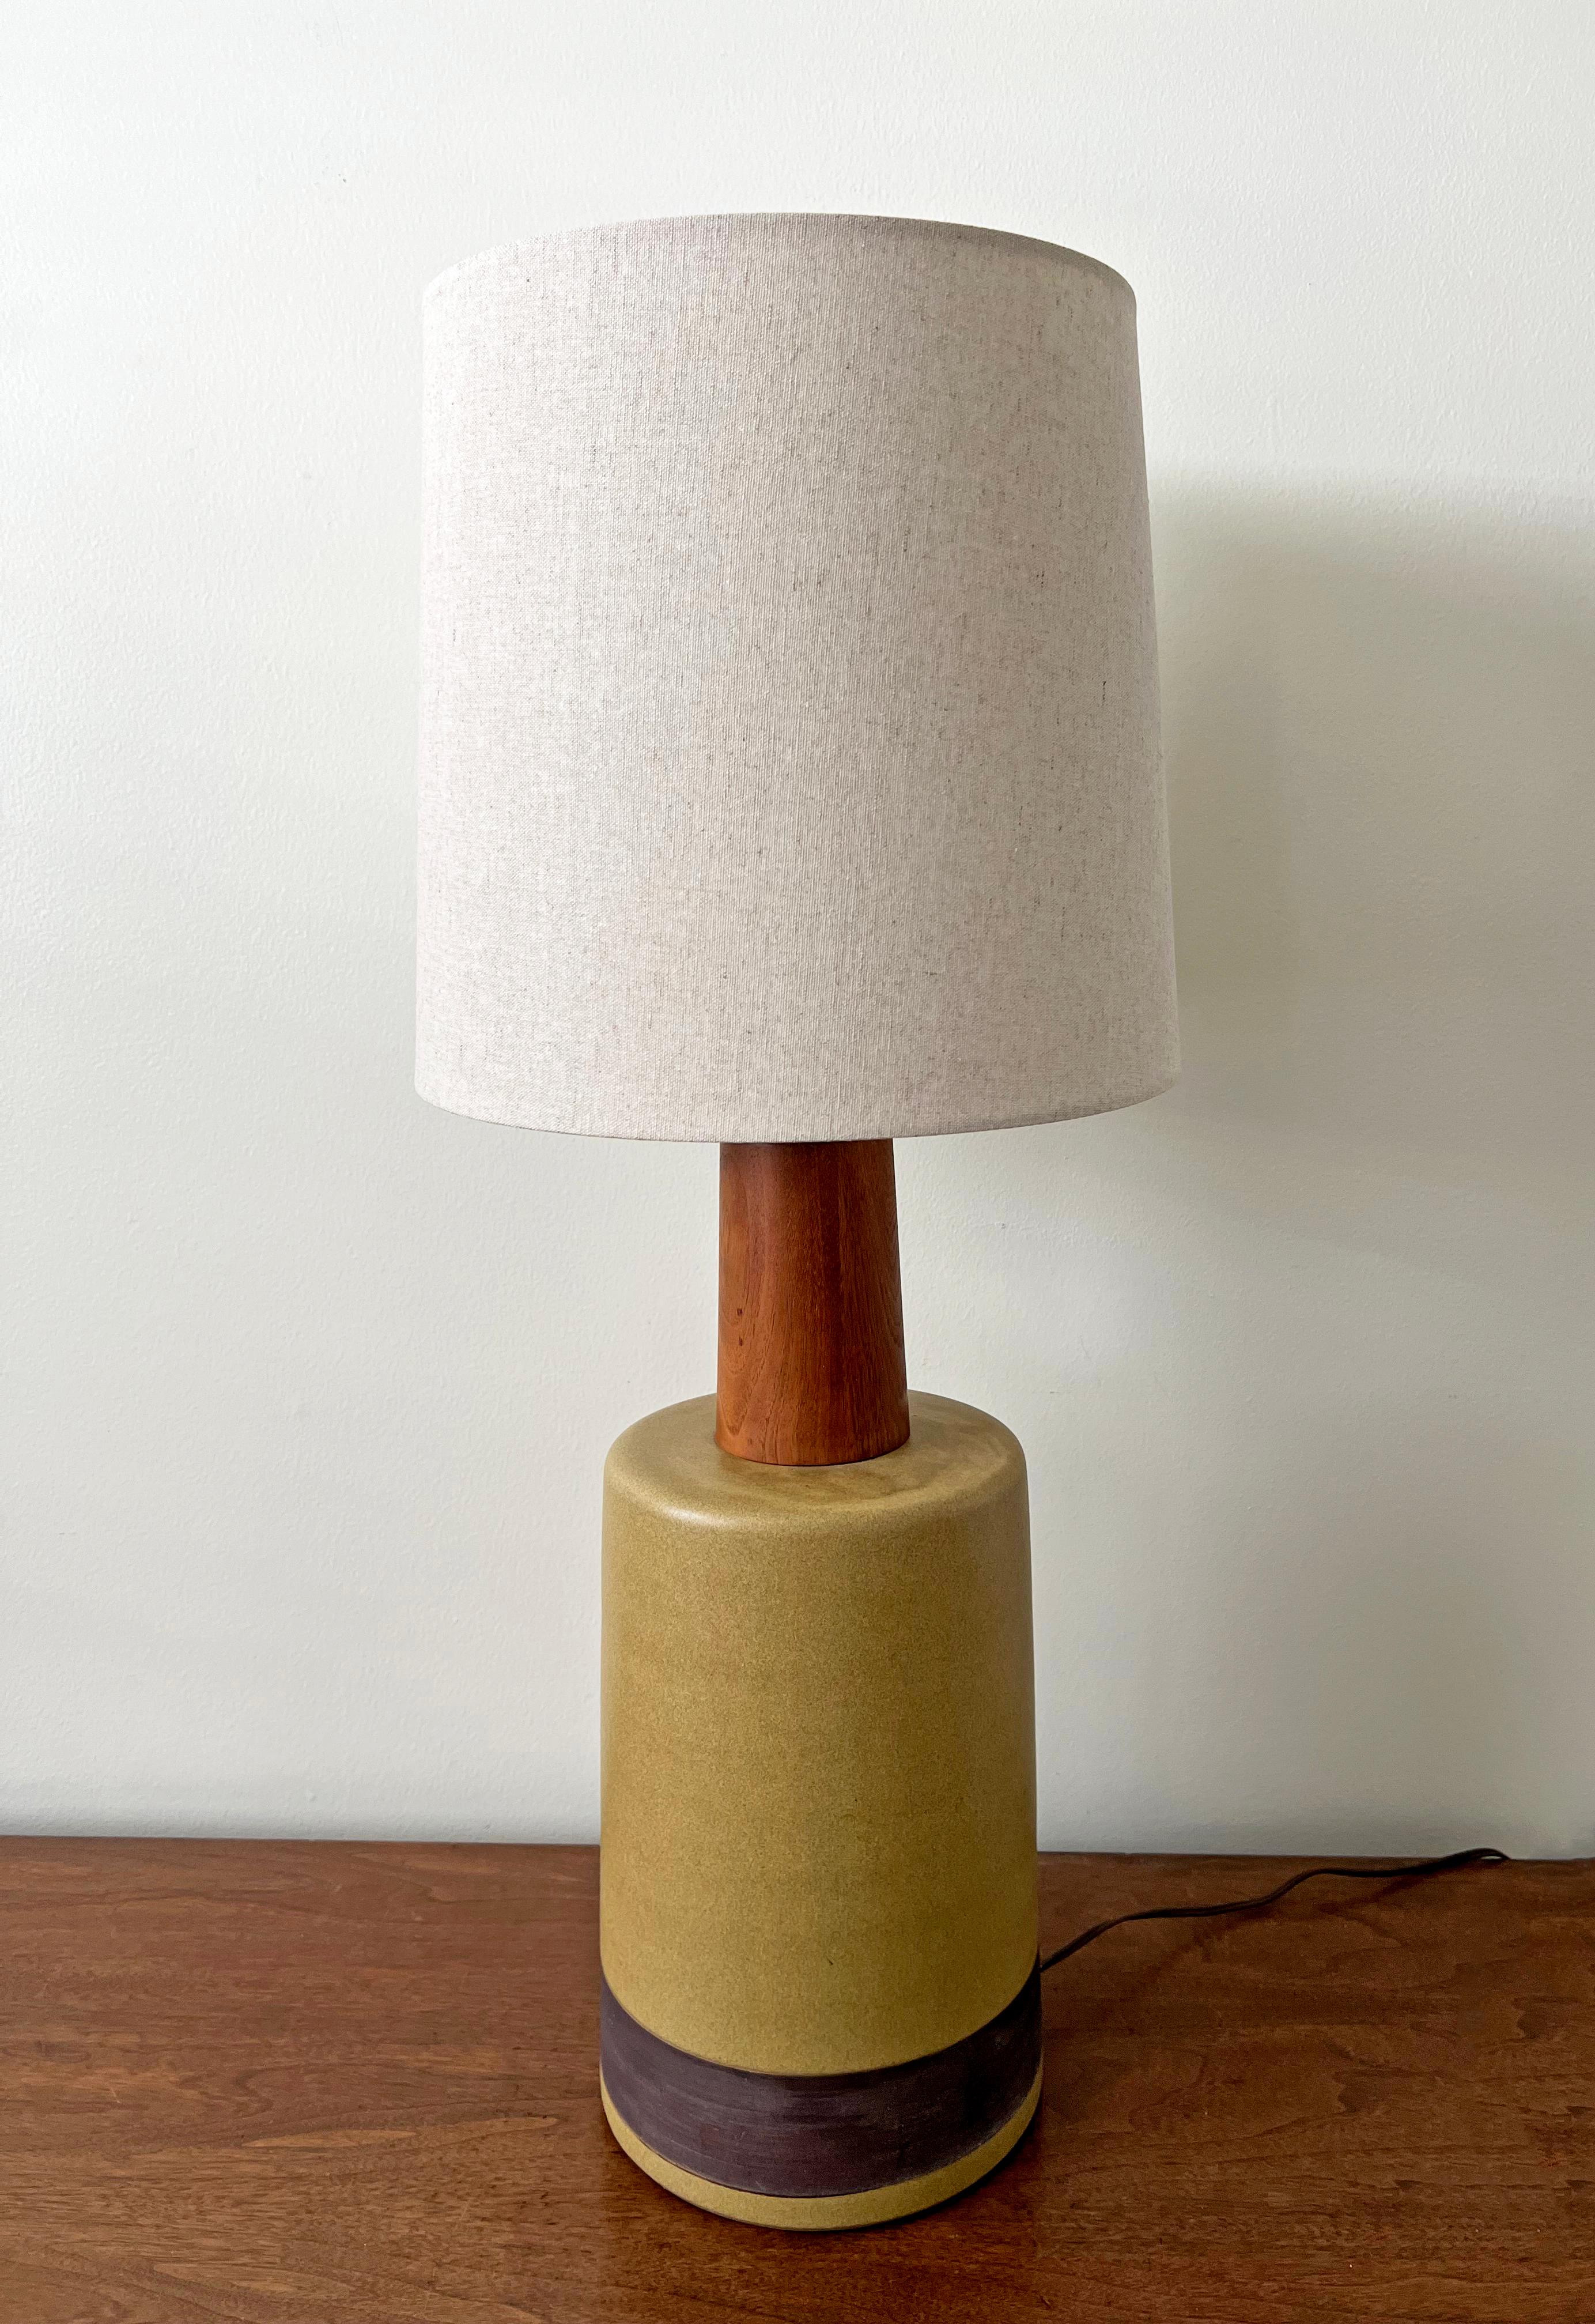 Offered is a large green/yellow ochre speckled matte glaze table lamp designed by husband and wife duo Jane & Gordon Martz. Produced by Marshall Studios, Indianapolis, 1960s.

Sold without lampshade. Dimensions in listing exclude shade.